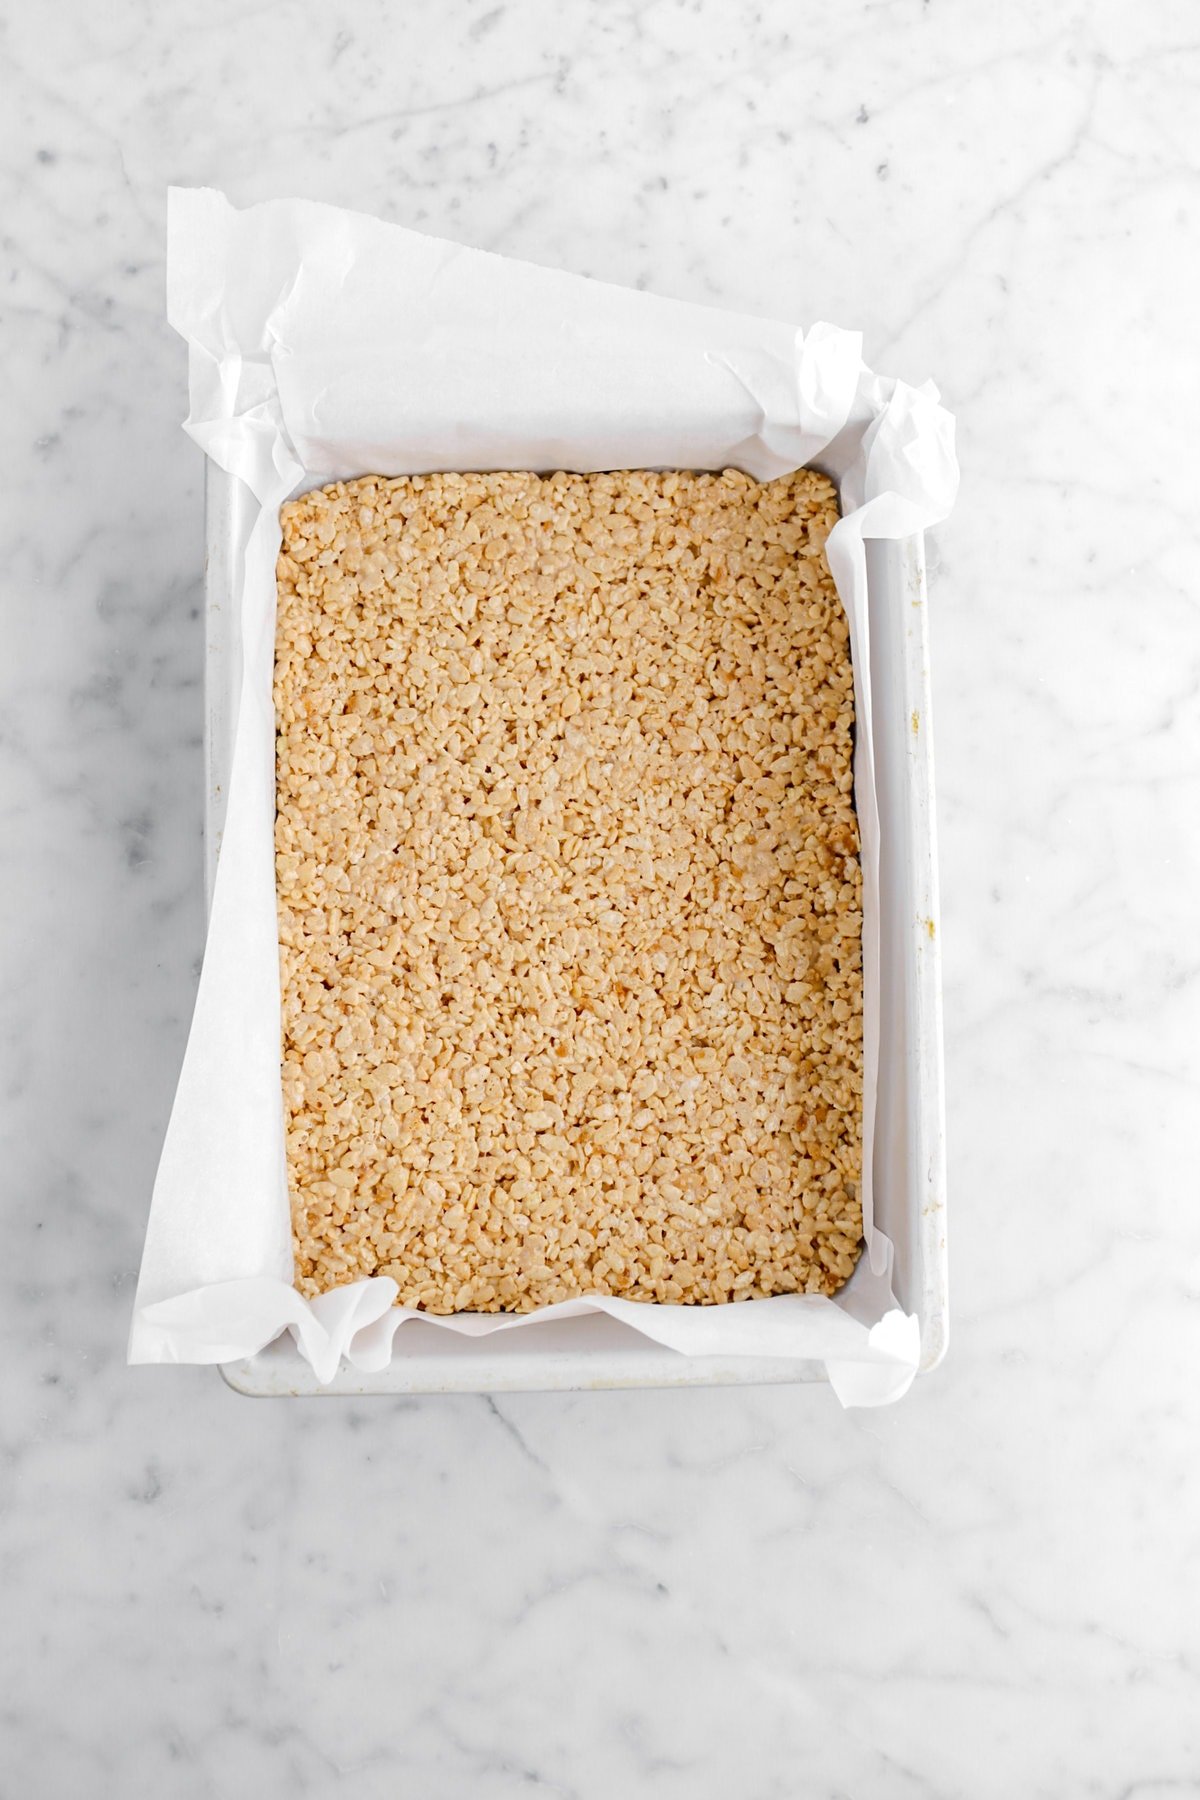 pressed rice cereal in lined cake pan.